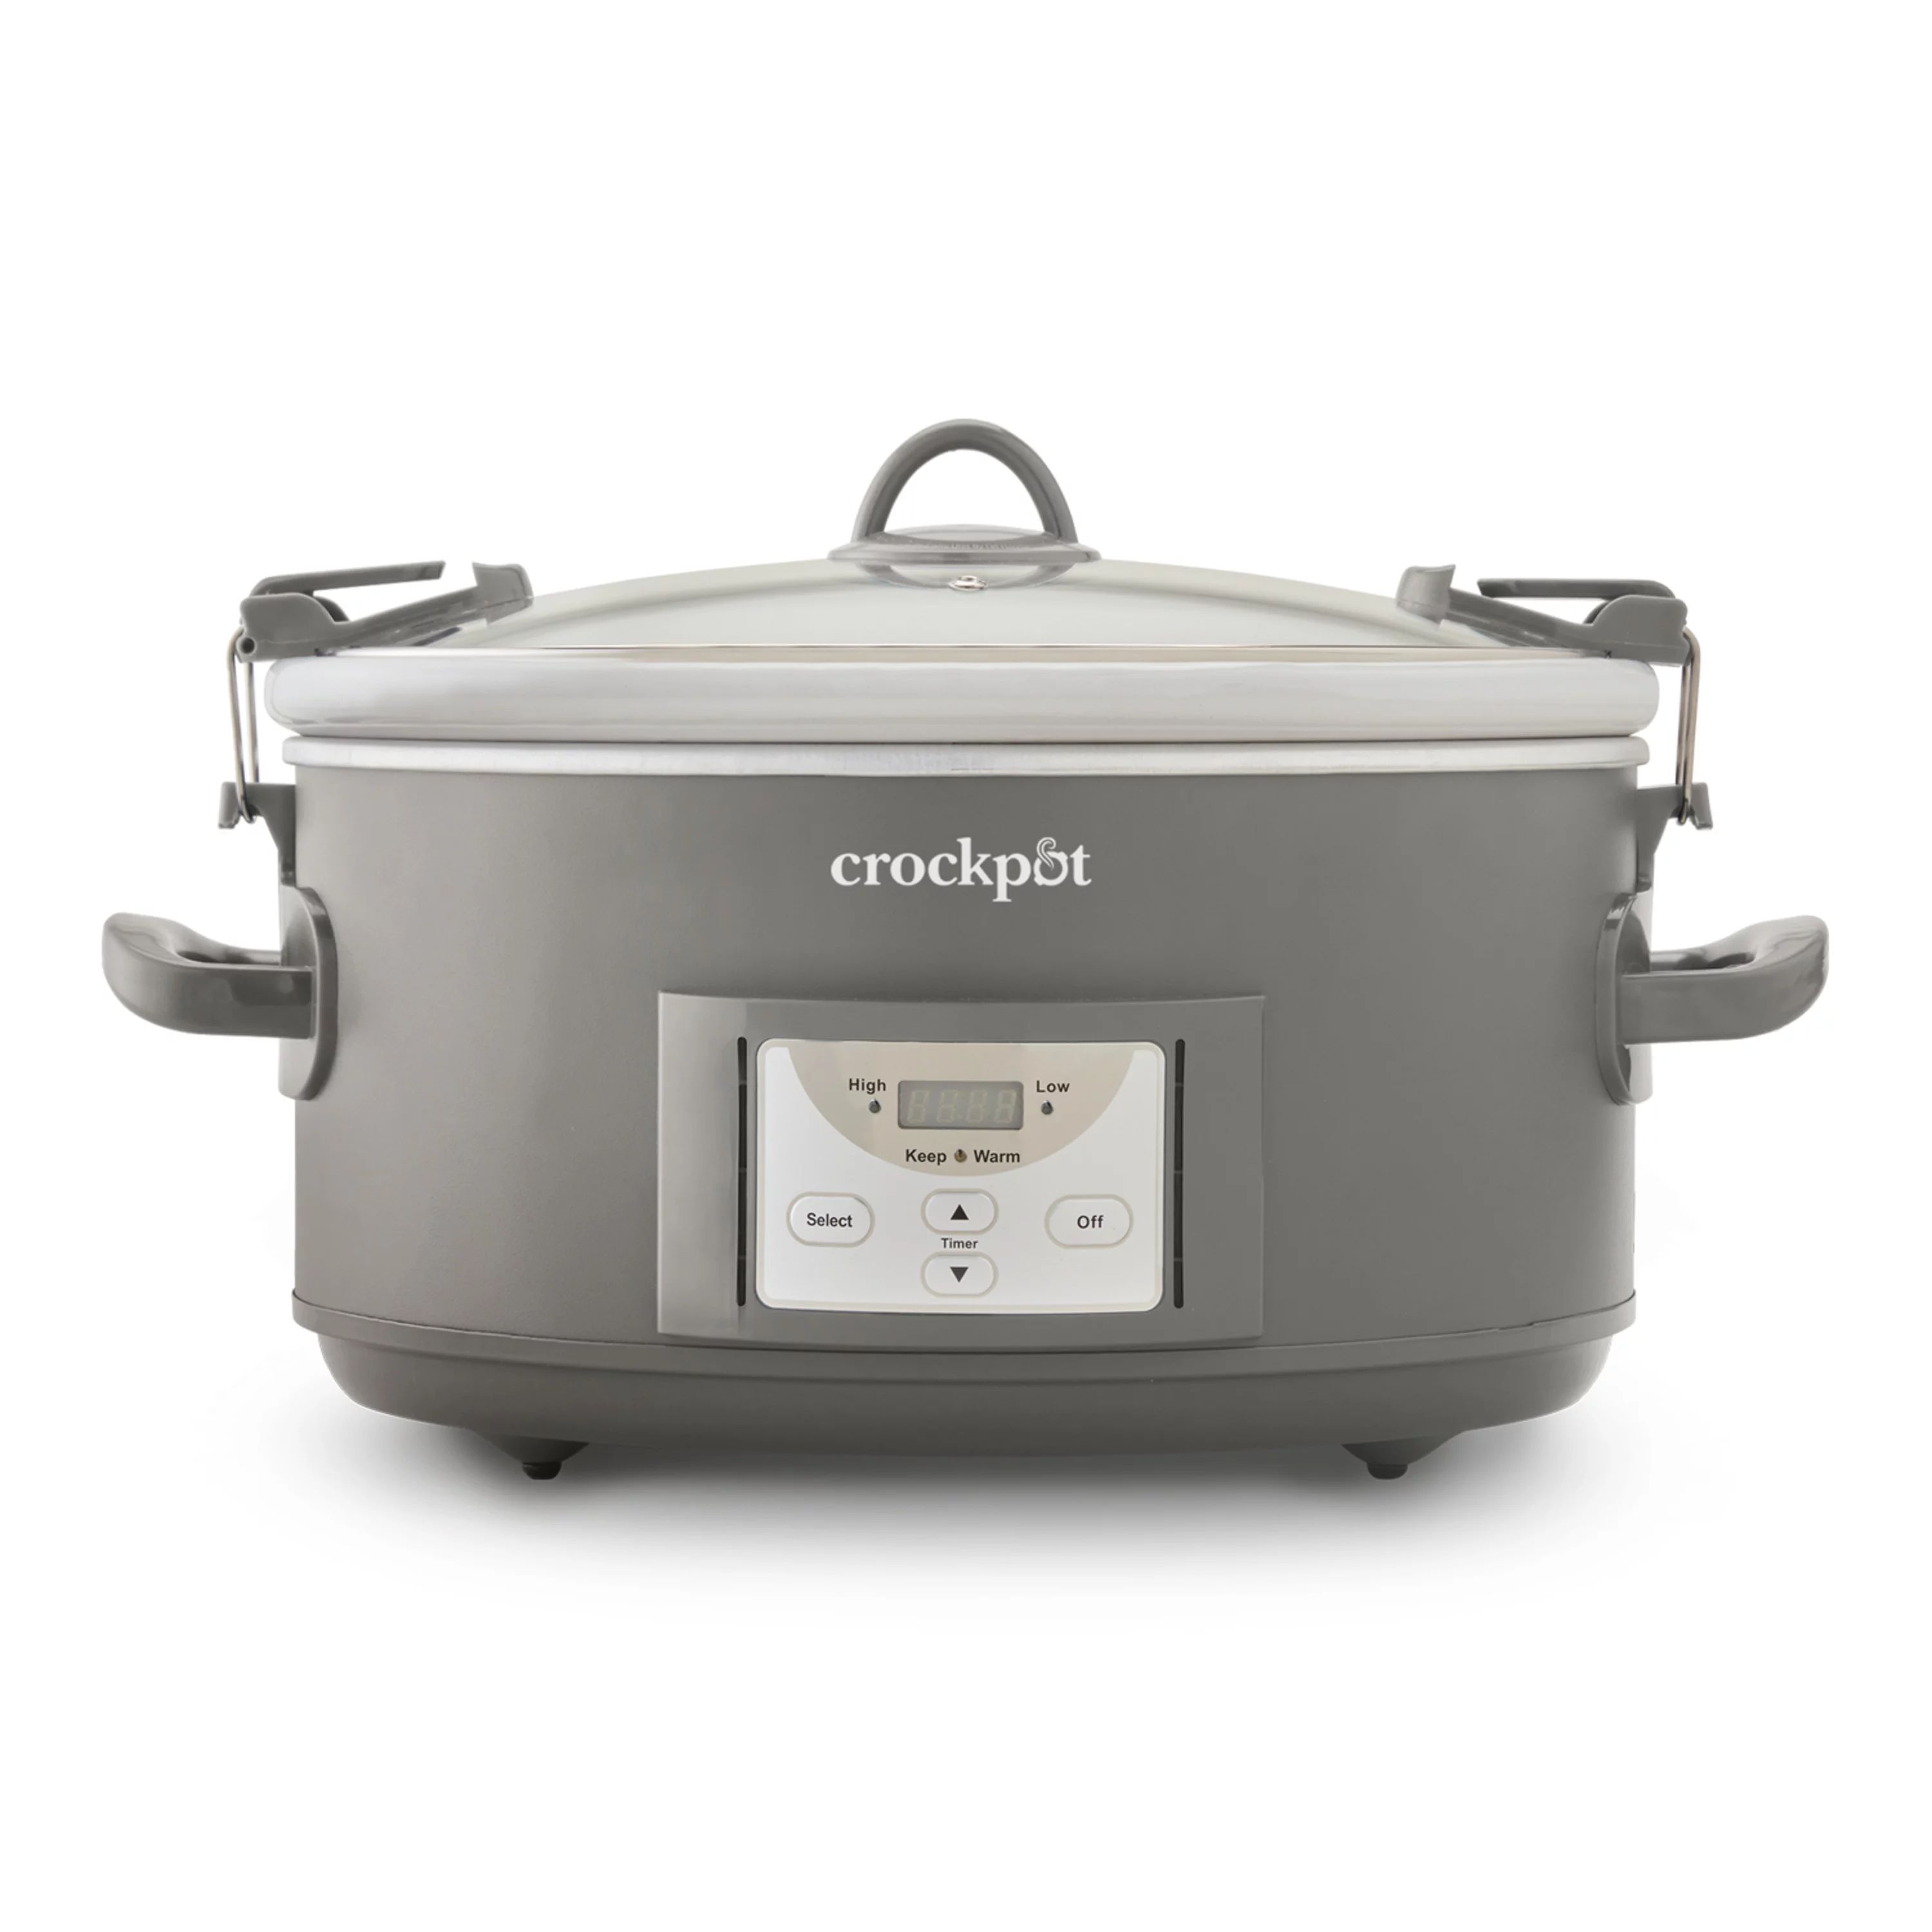 Crockpot 7-Quart Cook and Carry Programmable Slow Cooker, Grey | Walmart (US)